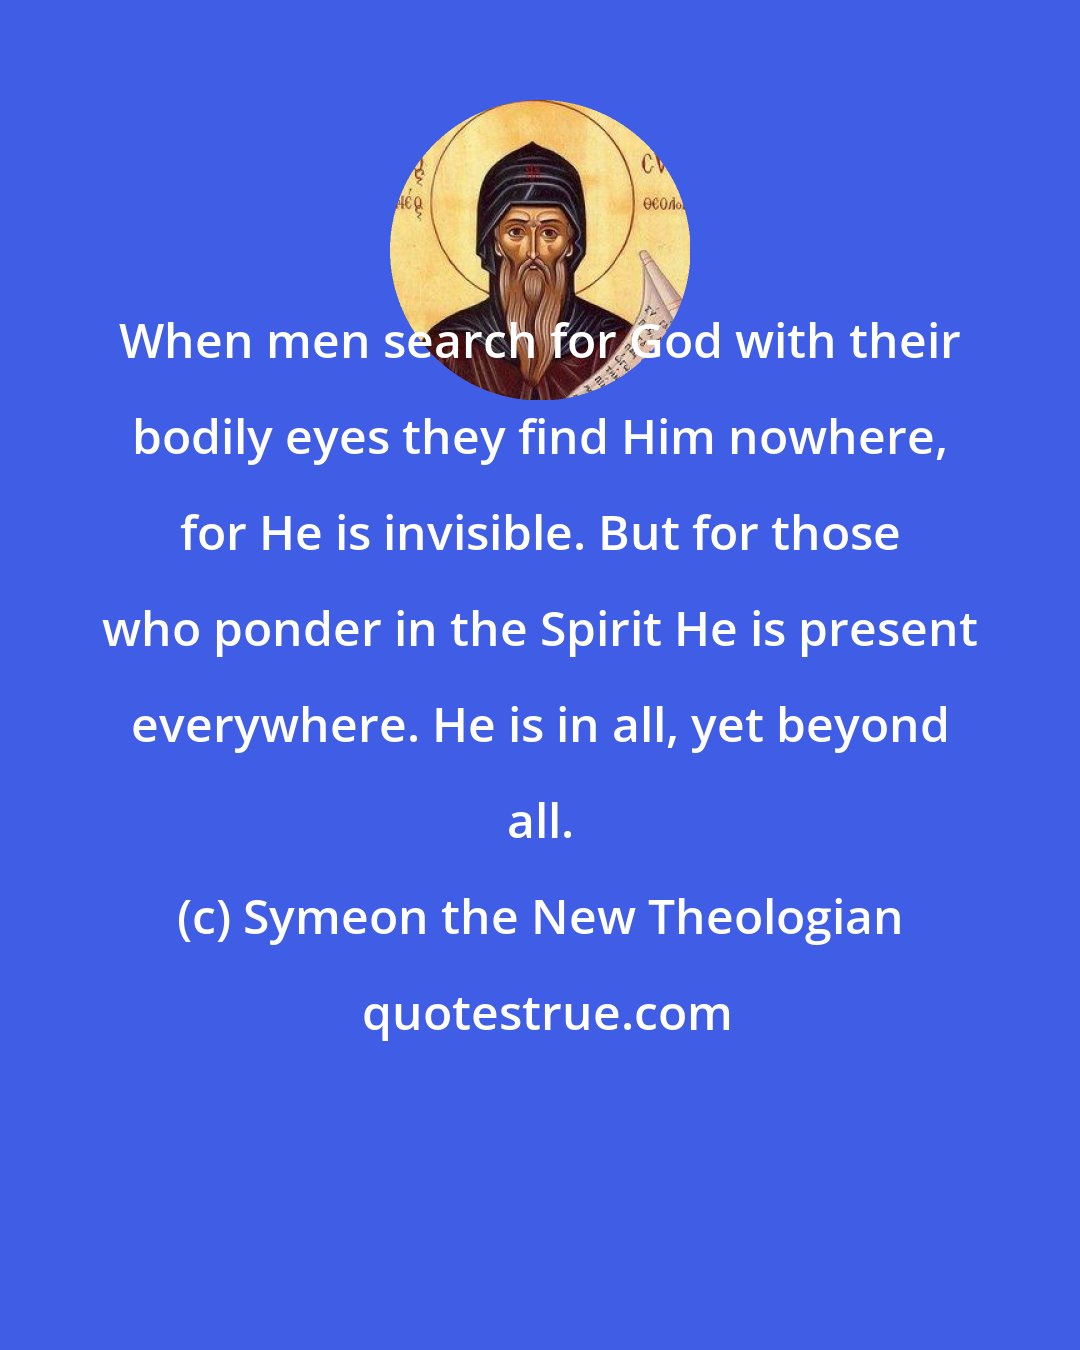 Symeon the New Theologian: When men search for God with their bodily eyes they find Him nowhere, for He is invisible. But for those who ponder in the Spirit He is present everywhere. He is in all, yet beyond all.